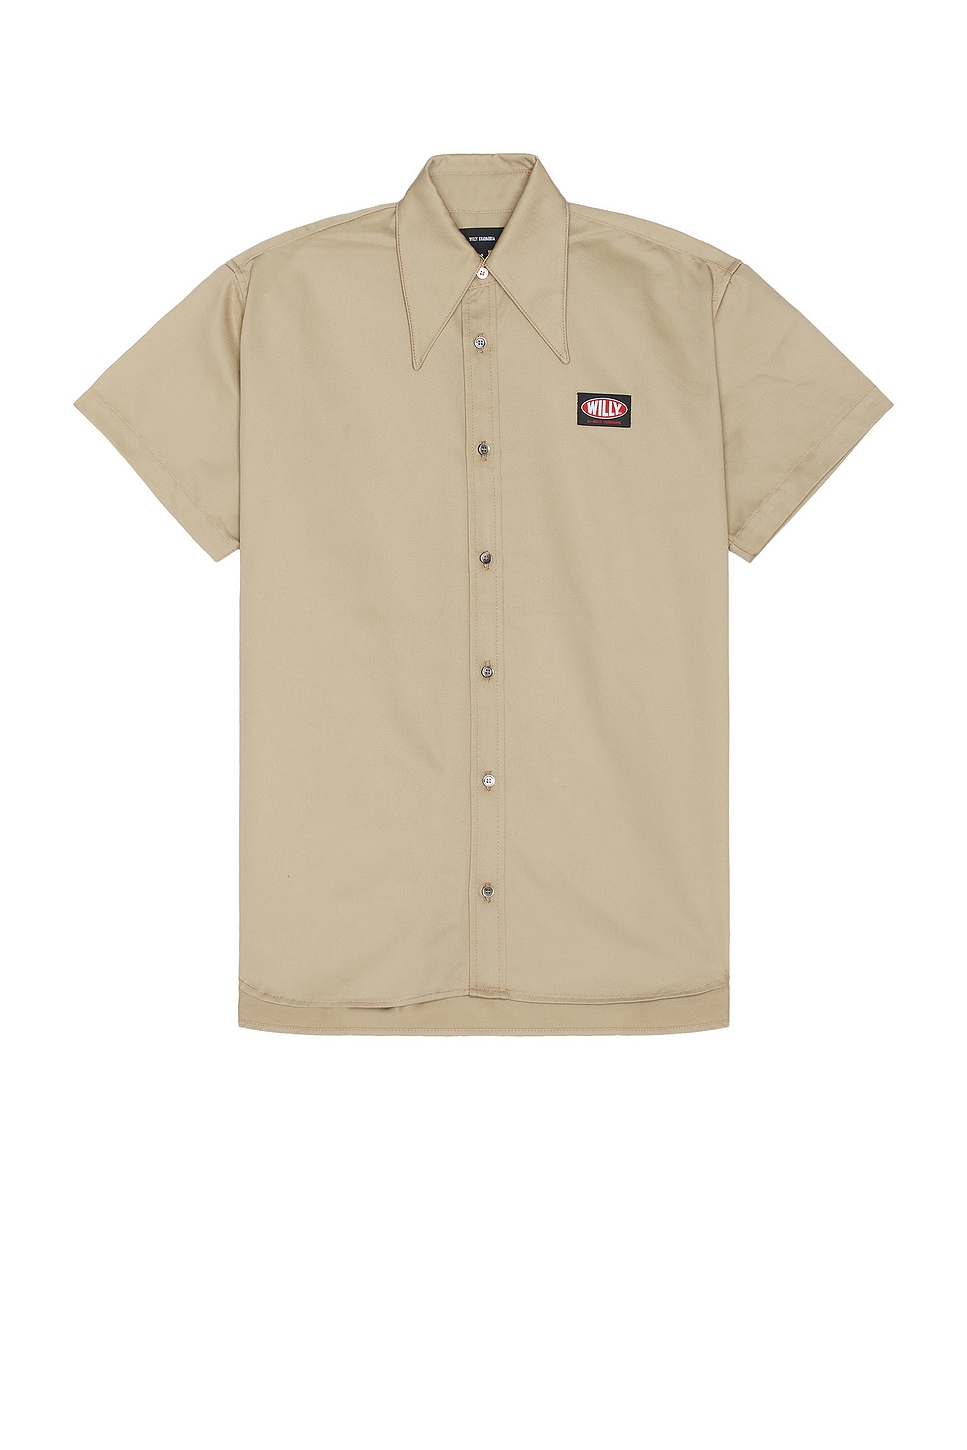 Pachuco Work Shirt in Brown